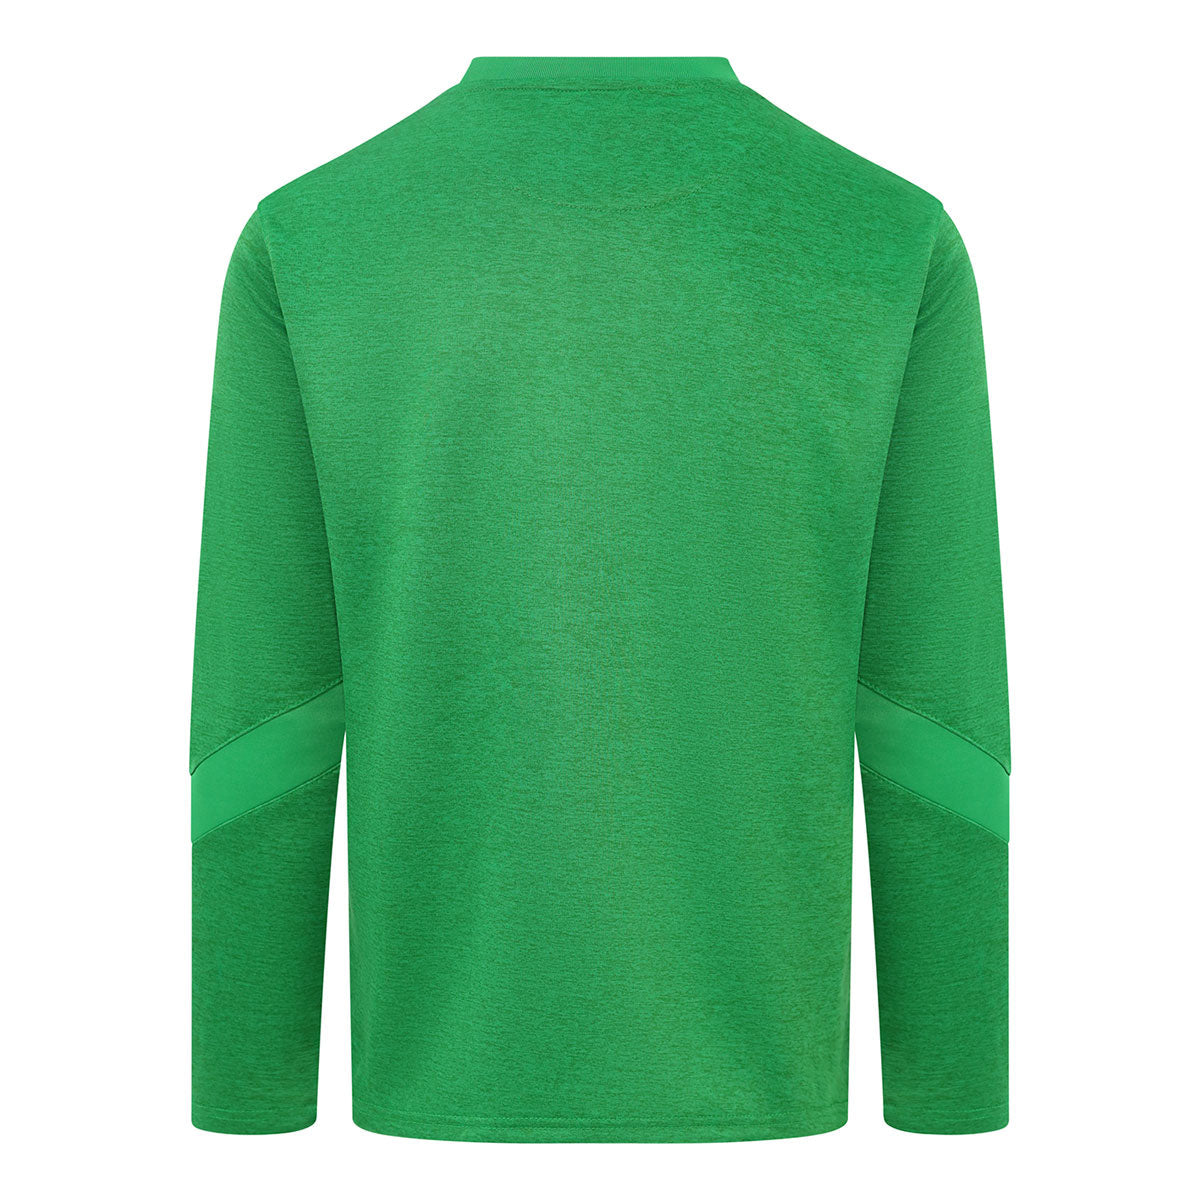 Mc Keever The Association of Irish Celtic Supporters Clubs Core 22 Sweat Top - Adult - Green